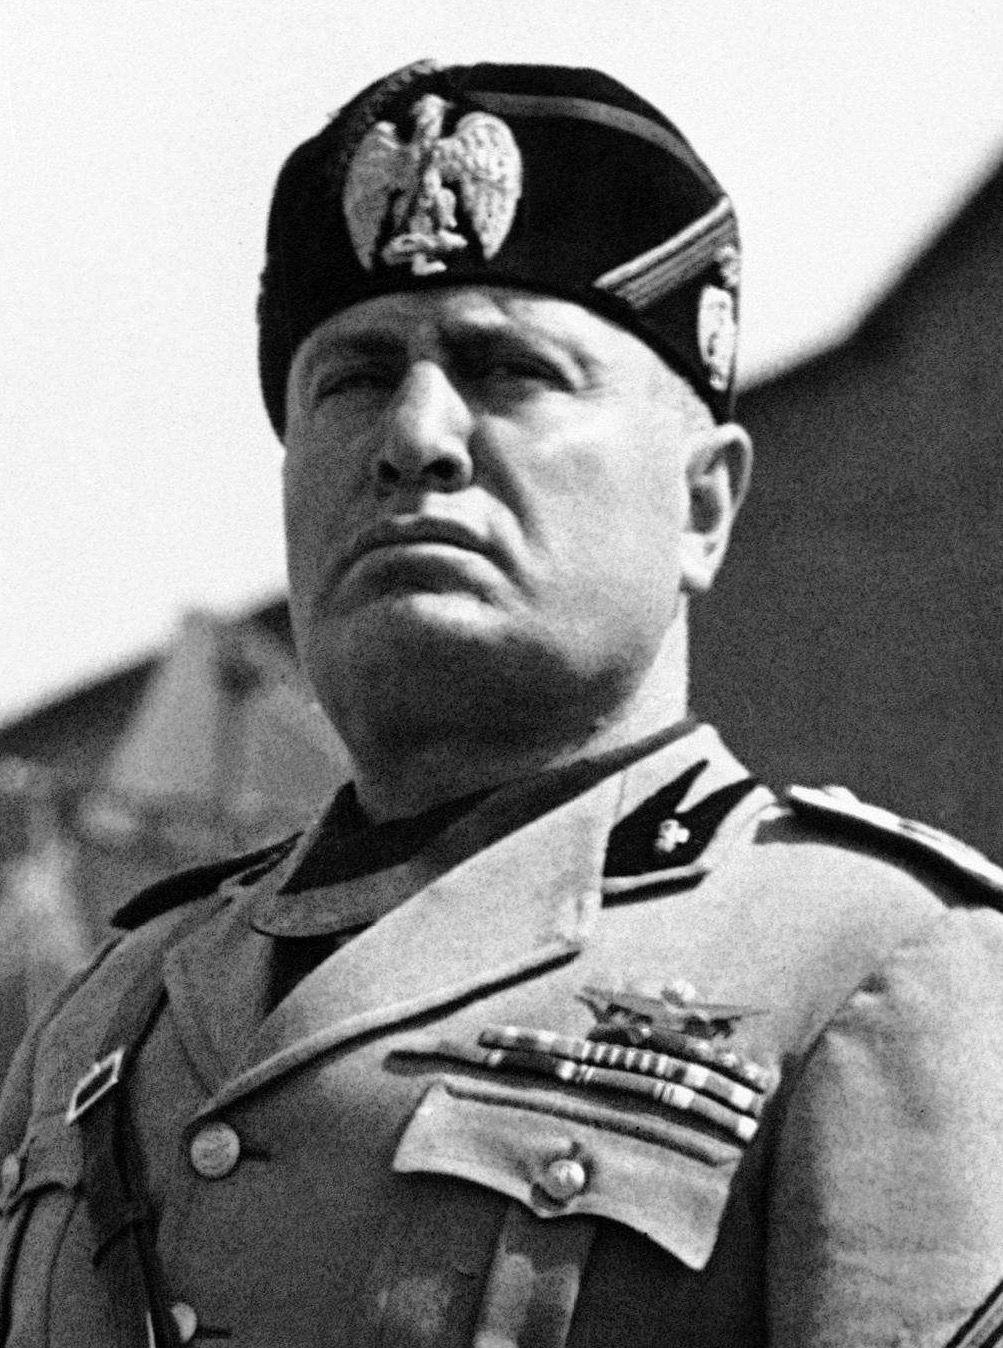 Benito Mussolini: Italy In 1919, Mussolini formed the Fascist Party after serving in WWI; he got the support of unemployed war veterans The veterans were organized into armed